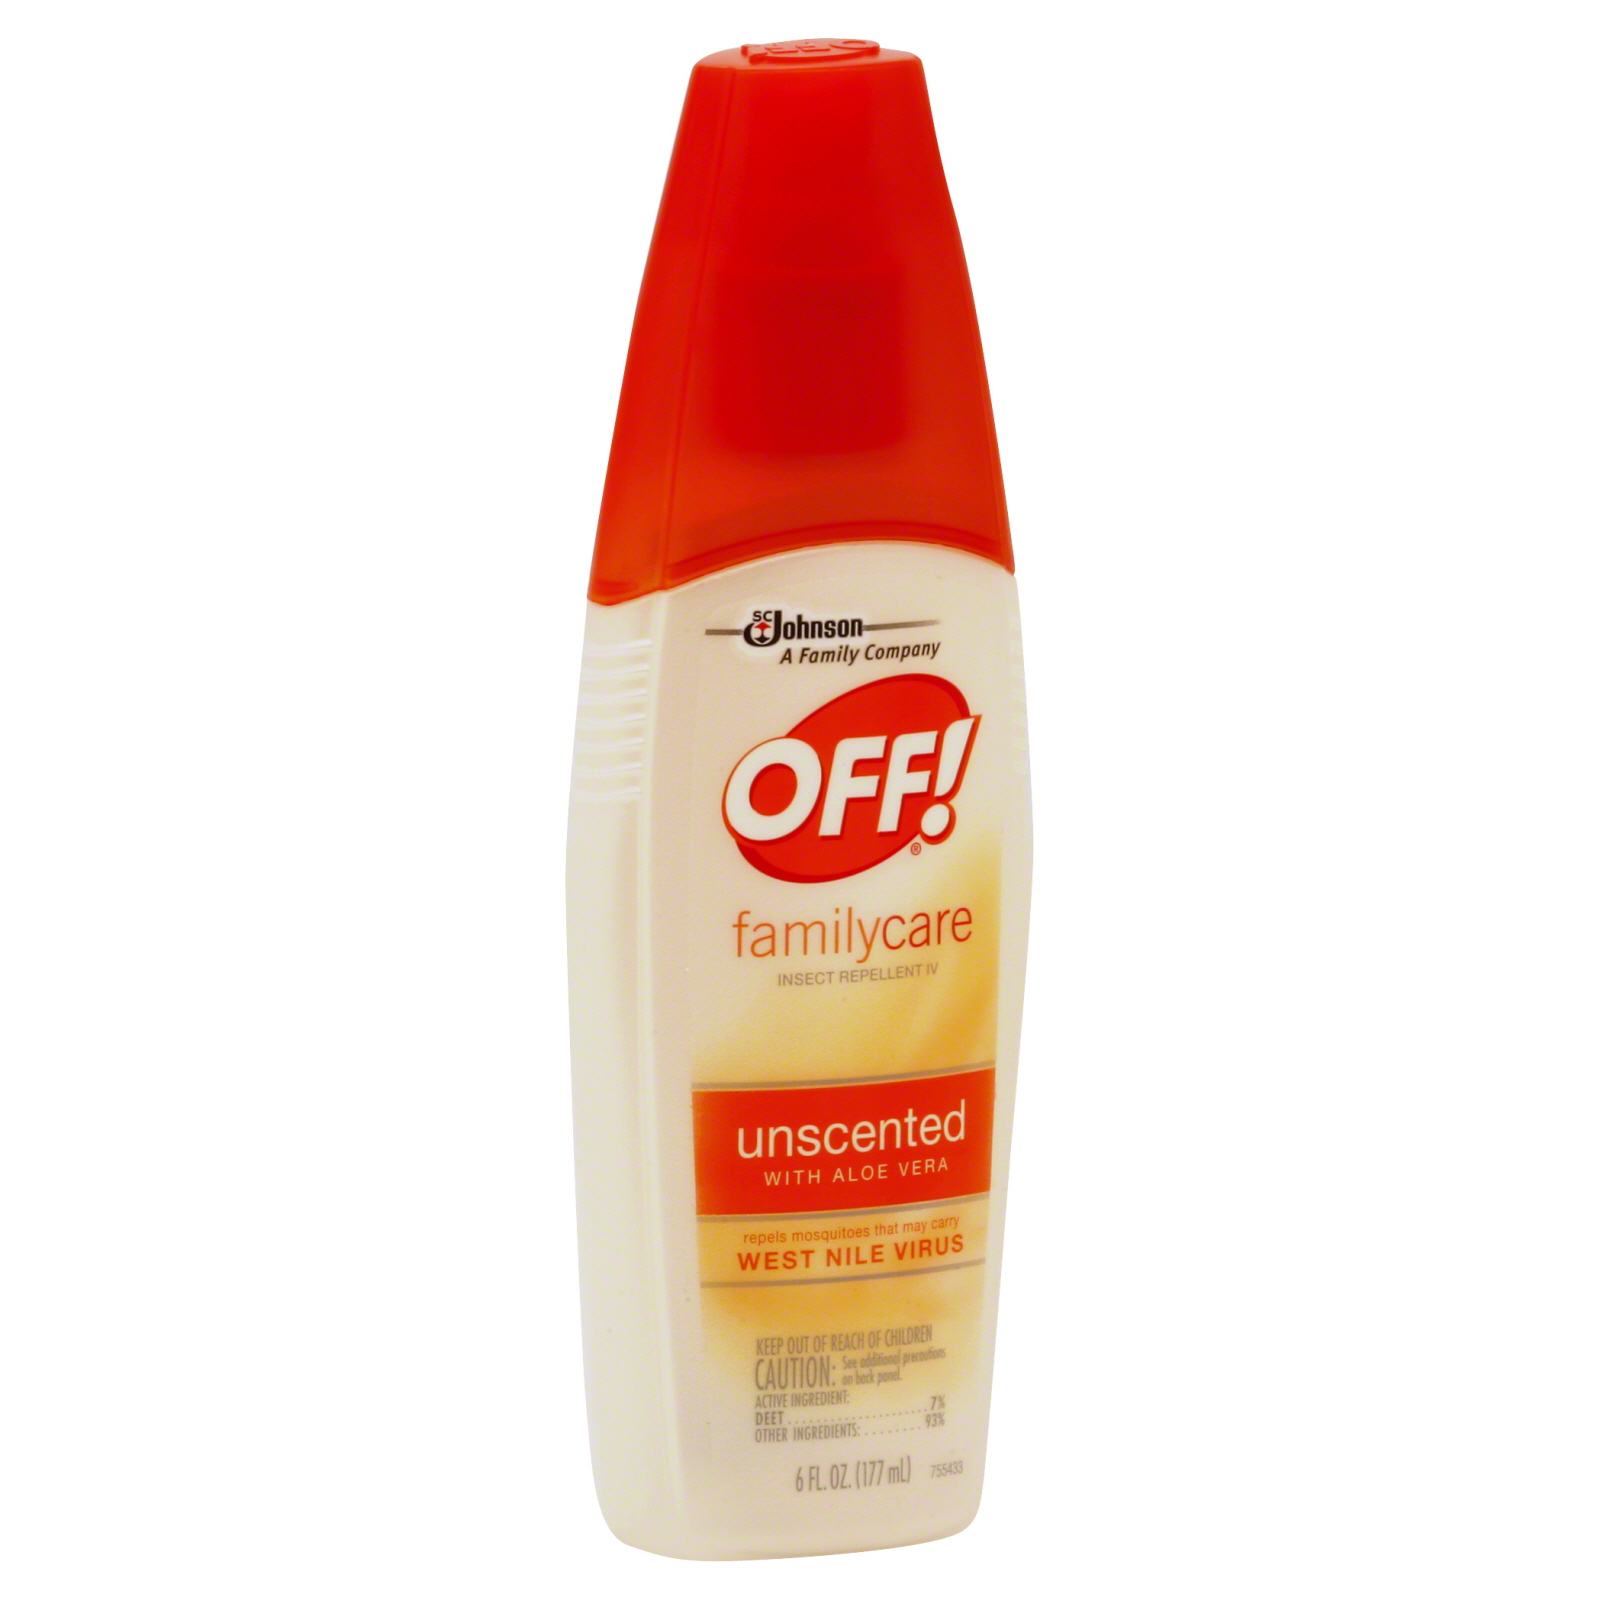 Off! FamilyCare Insect Repellent IV, Unscented, 6 fl oz (177 ml)